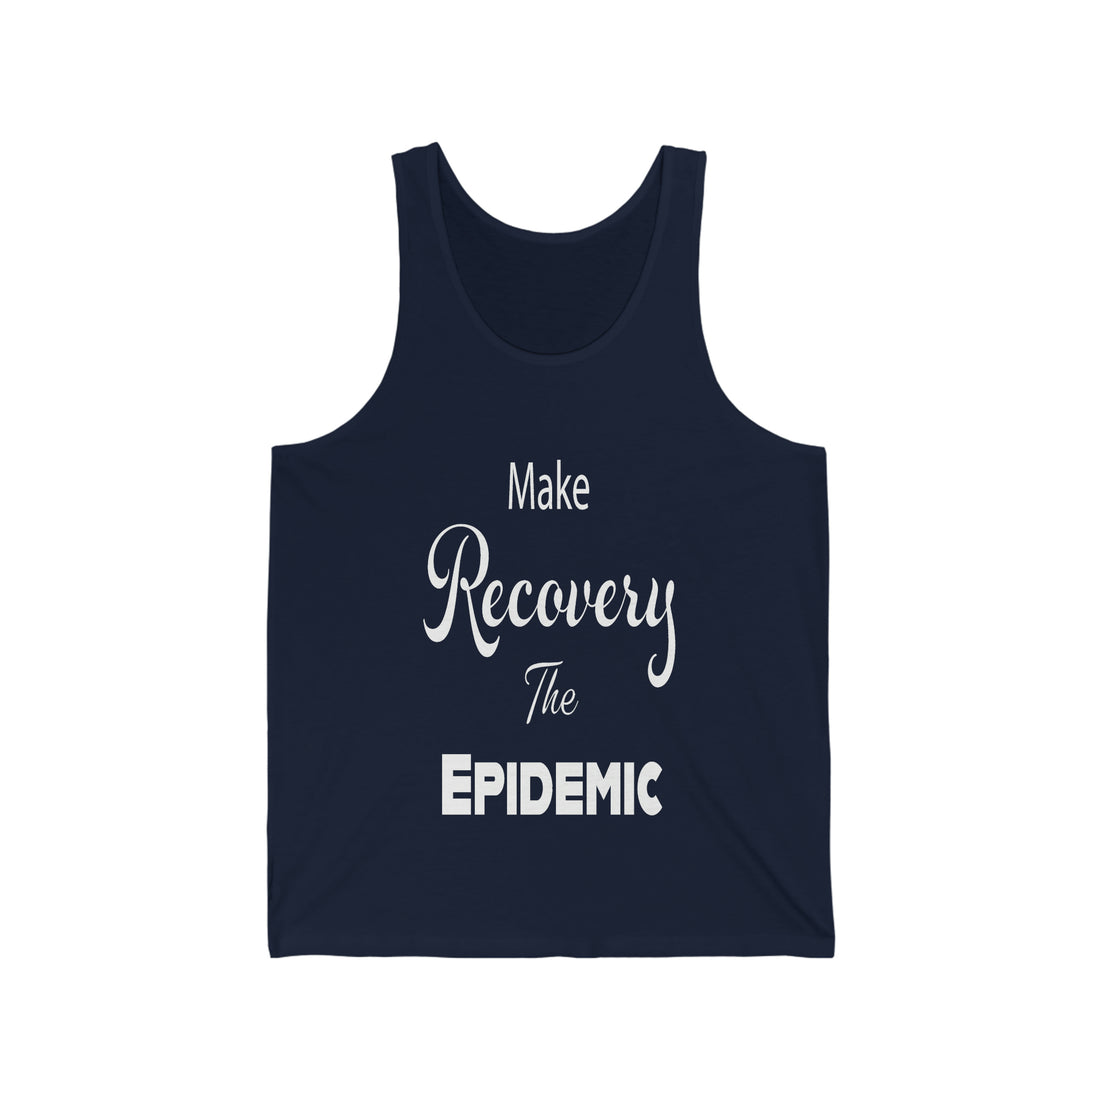 Make Recovery The Epidemic - Unisex Jersey Tank Top